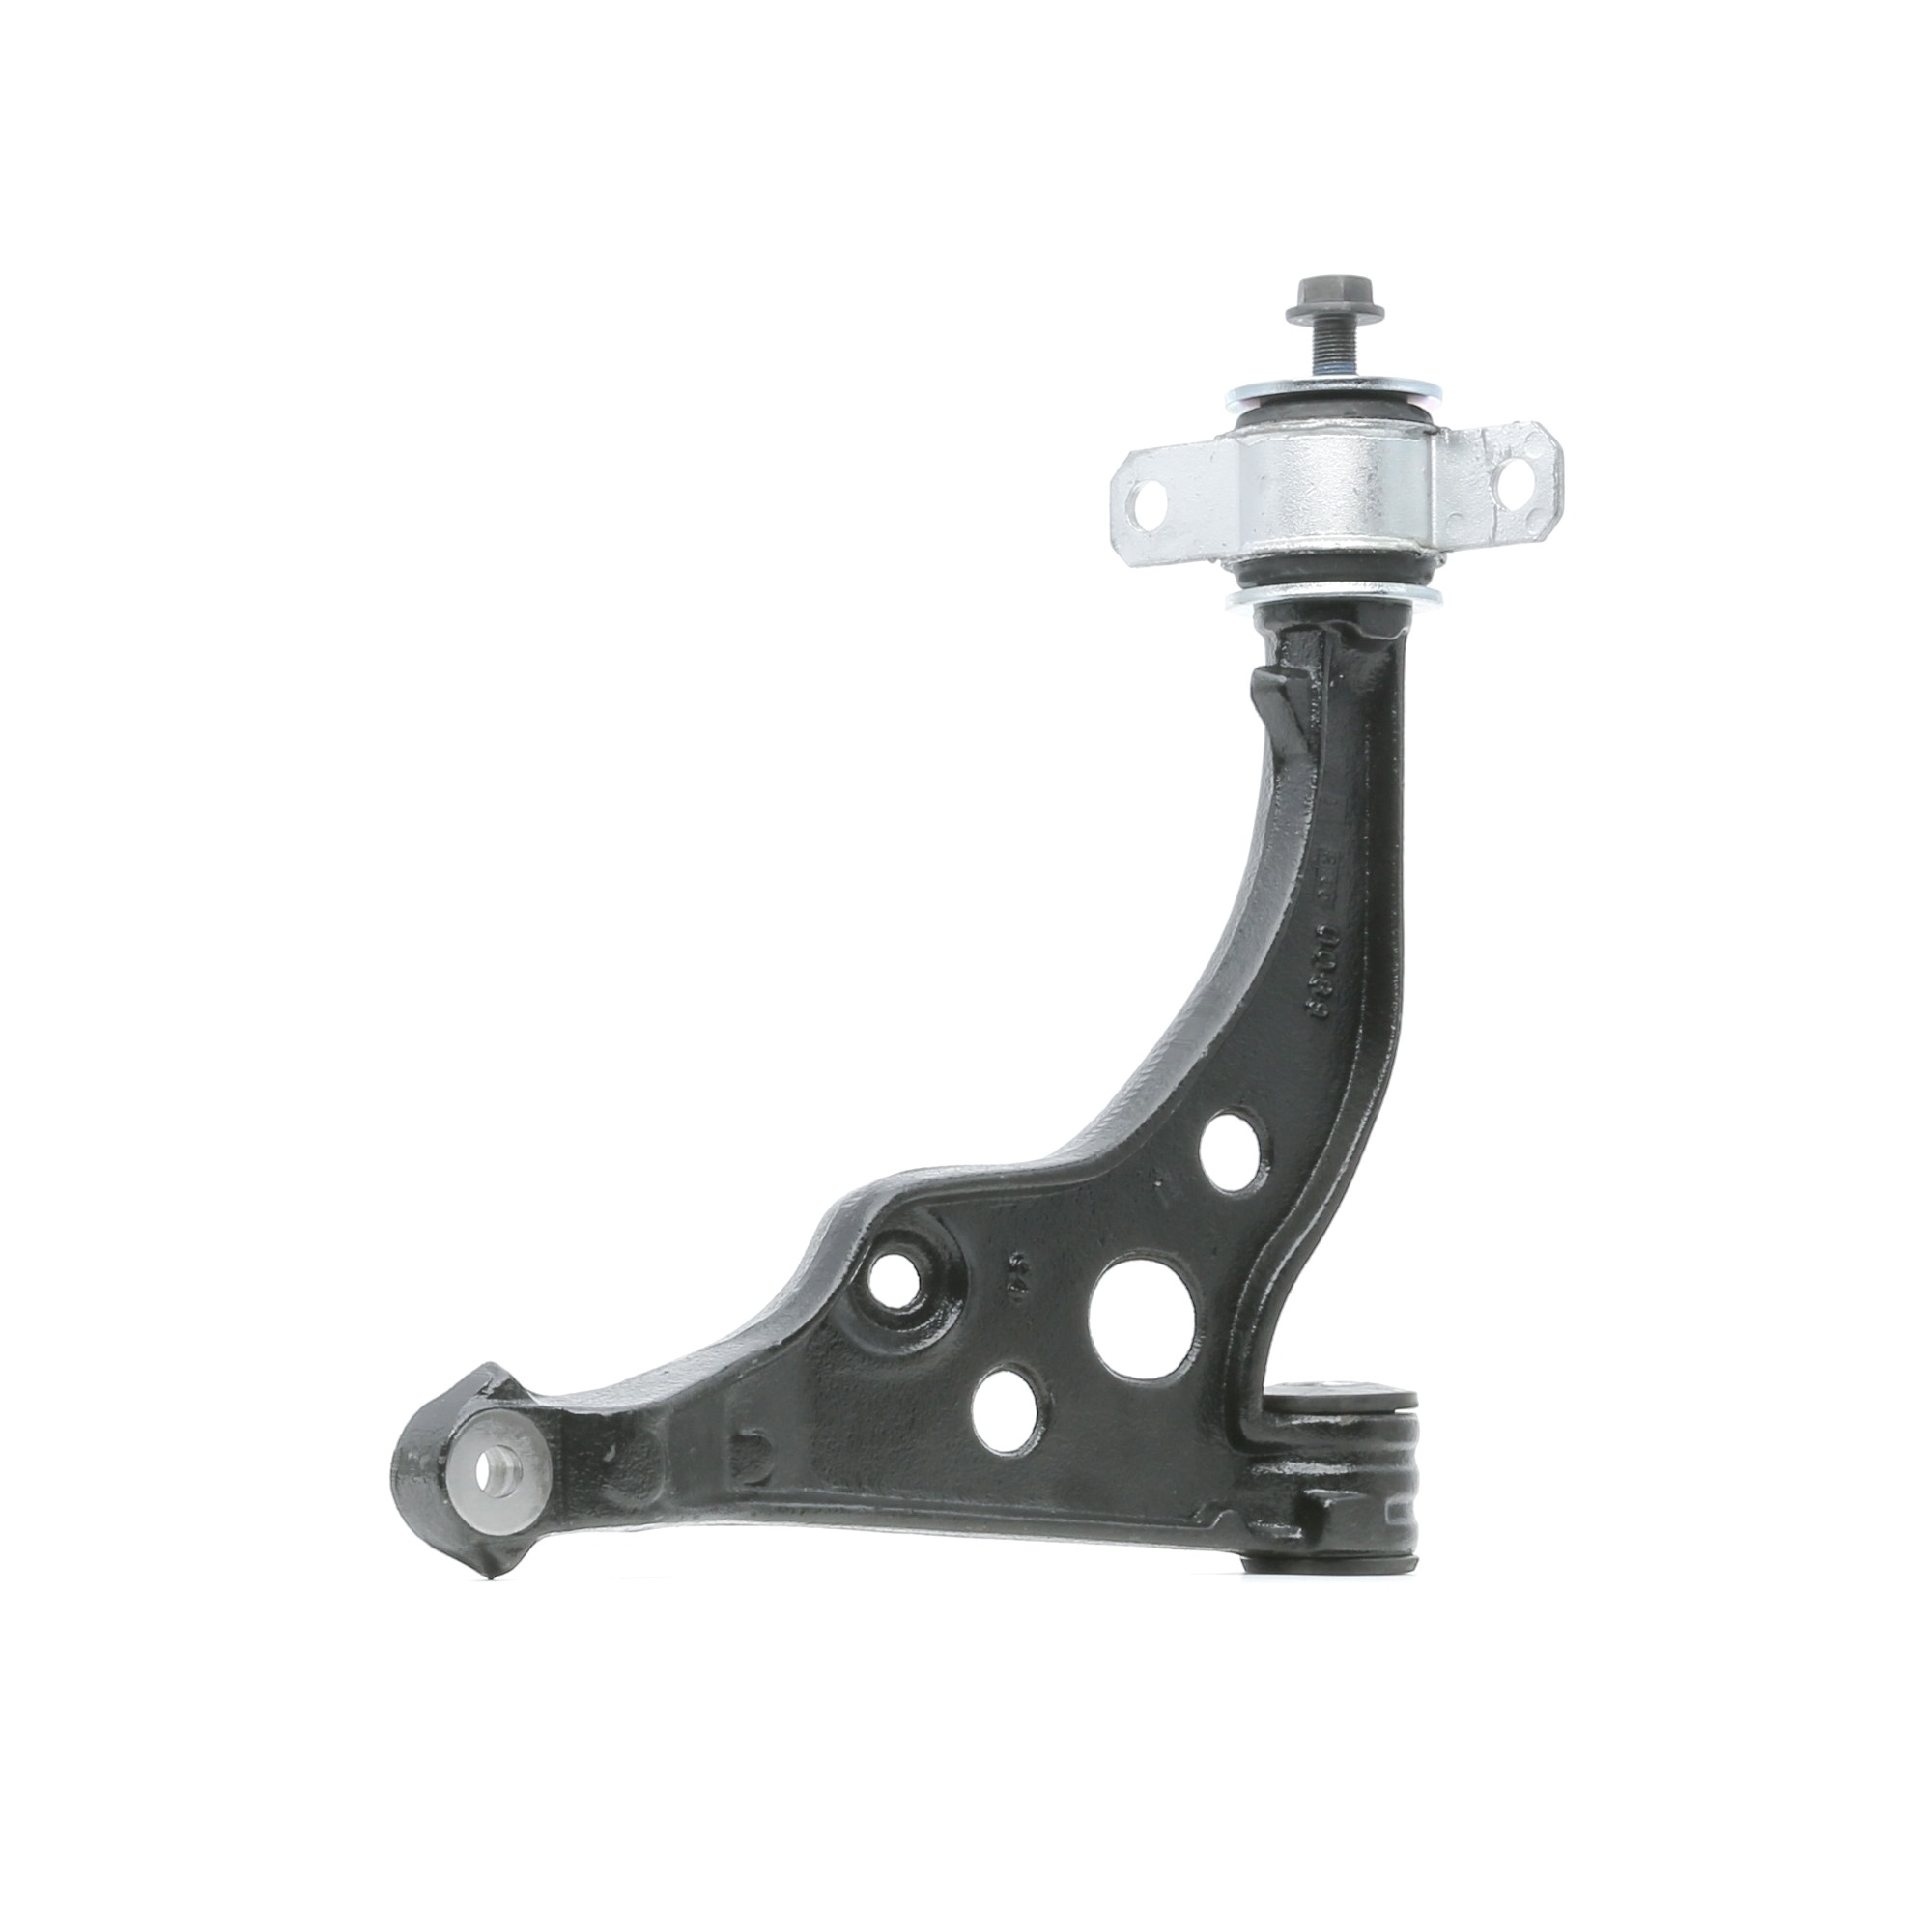 STARK SKCA-0050676 Suspension arm without ball joint, with rubber mount, Front Axle Left, Lower, Control Arm, Cone Size: 16 mm